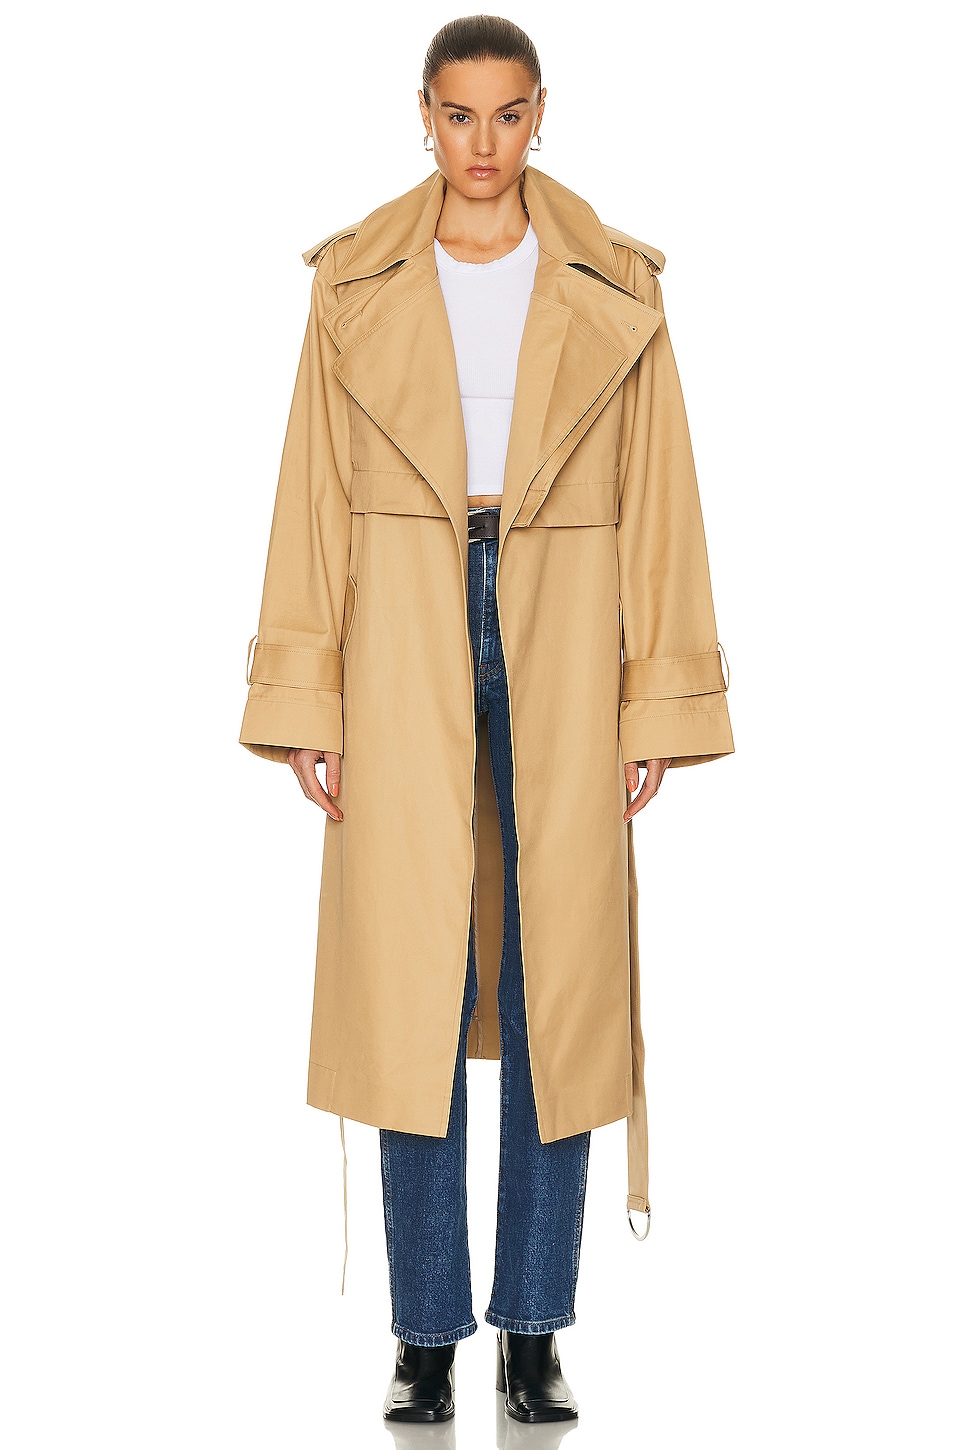 Image 1 of GRLFRND The Convertible Trench Coat in British Tan